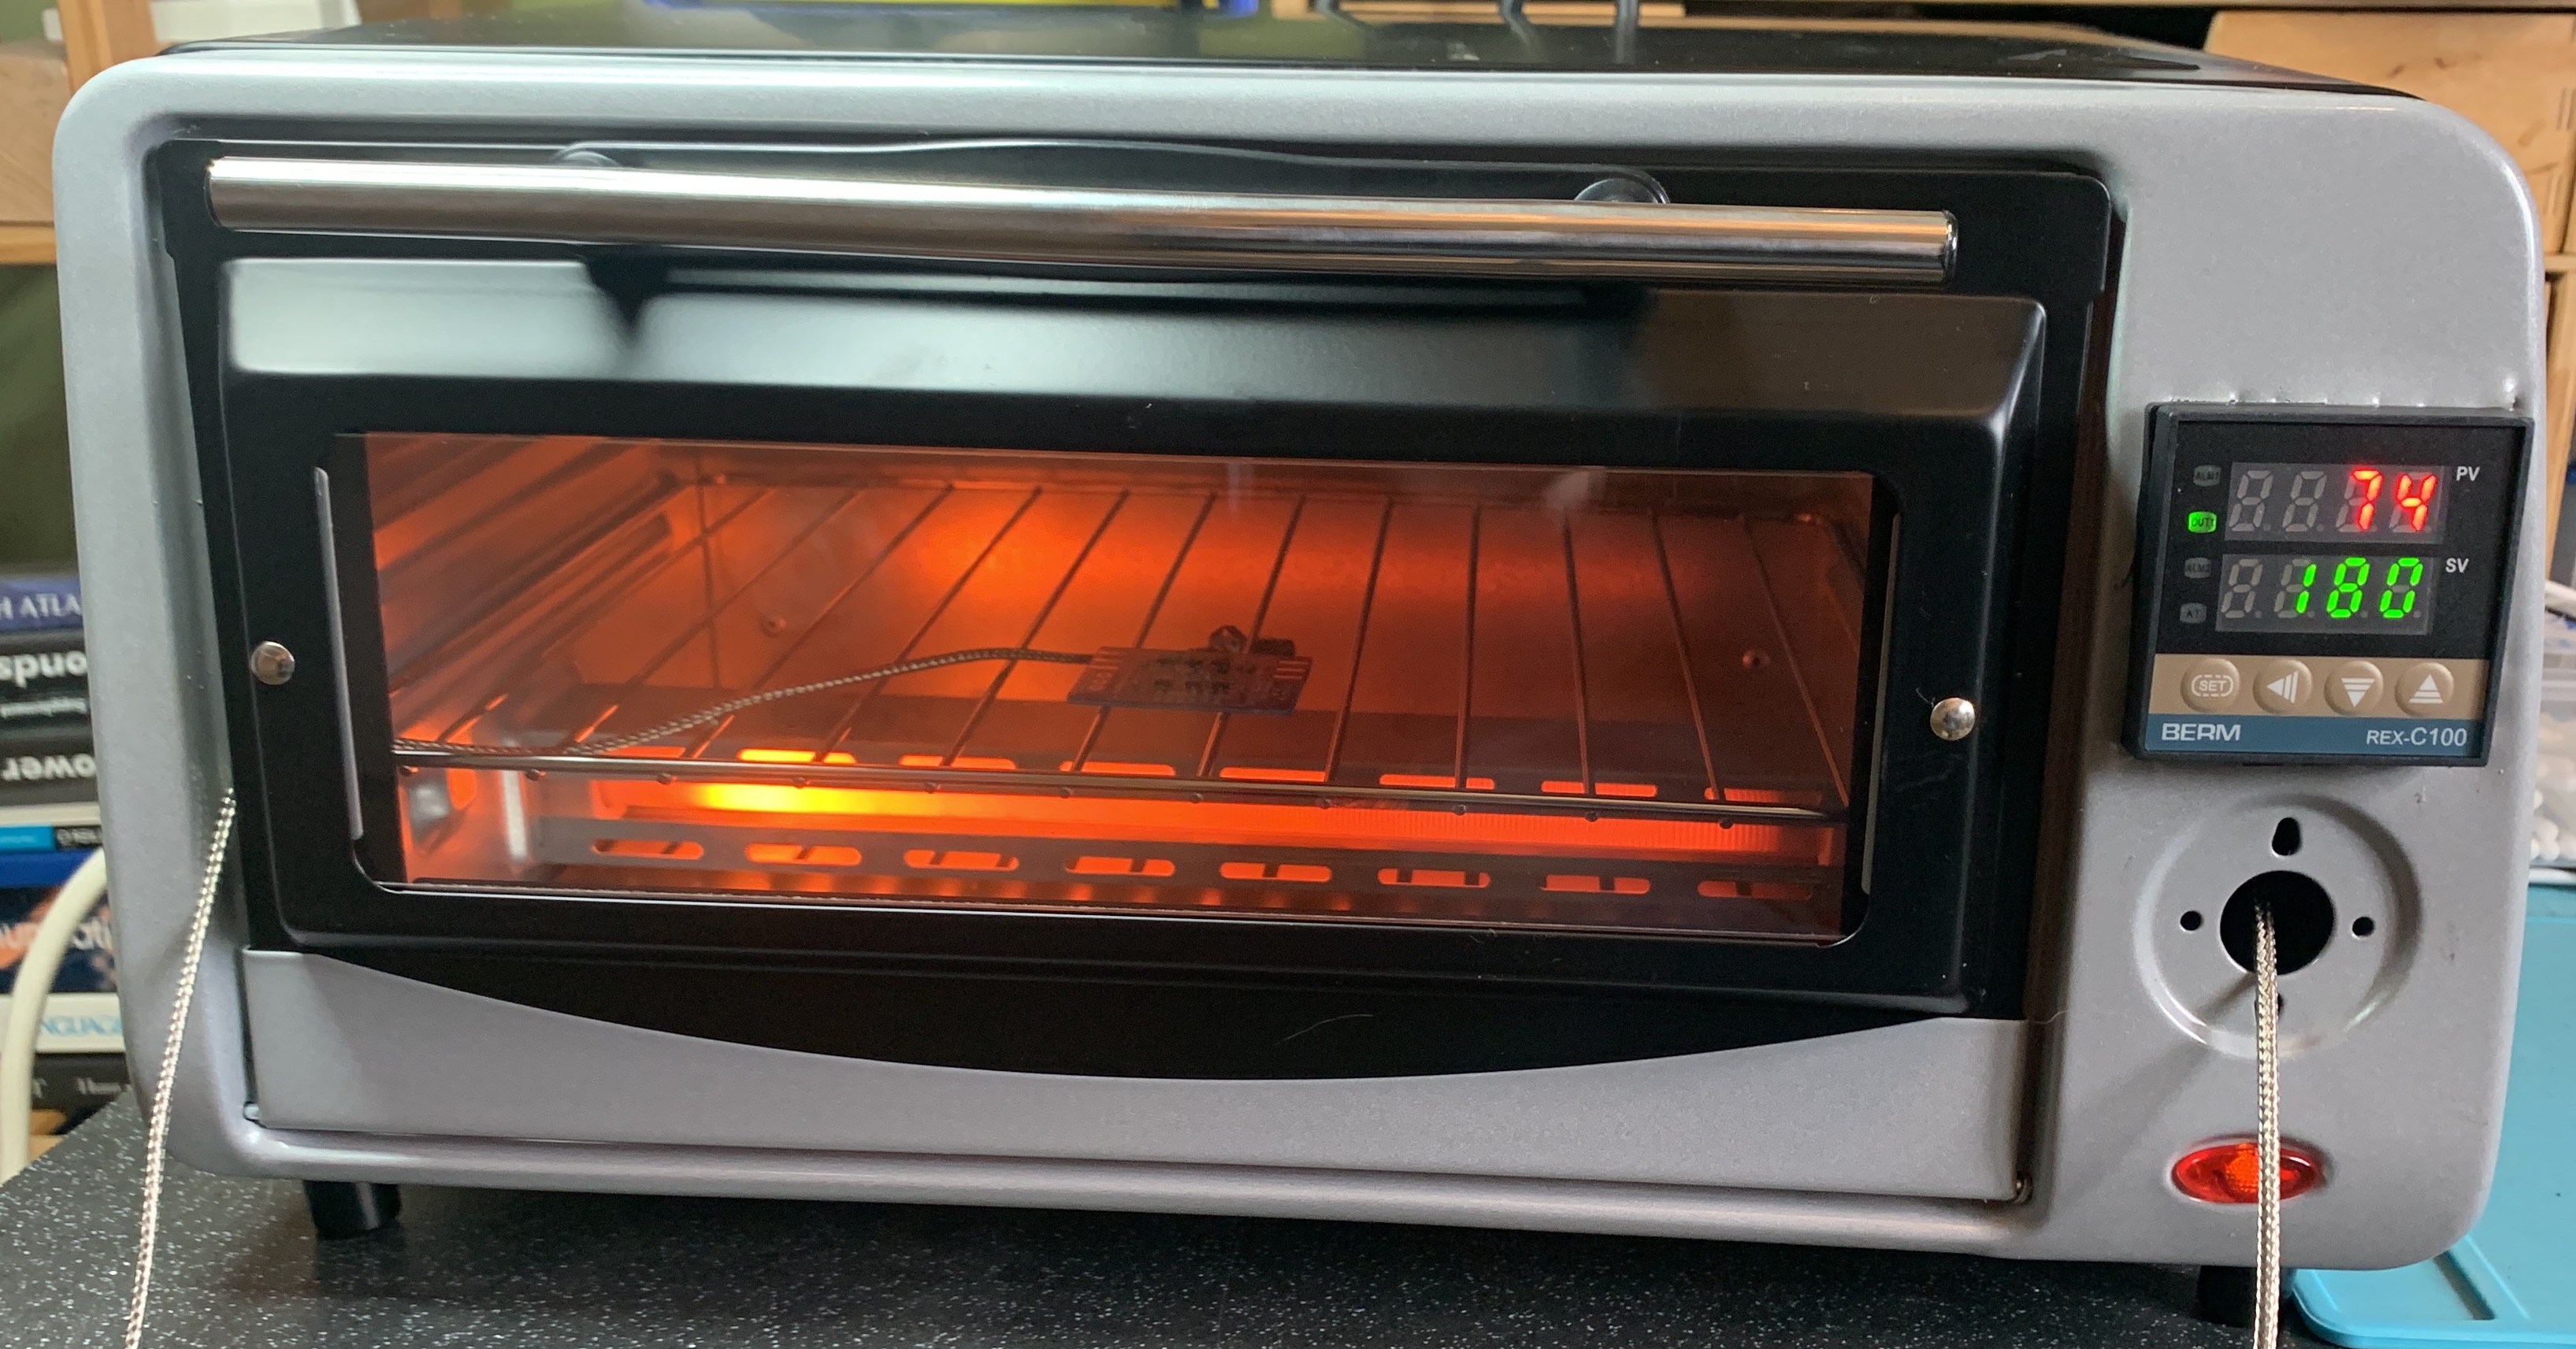 A modified toaster oven with a small PCB inside.